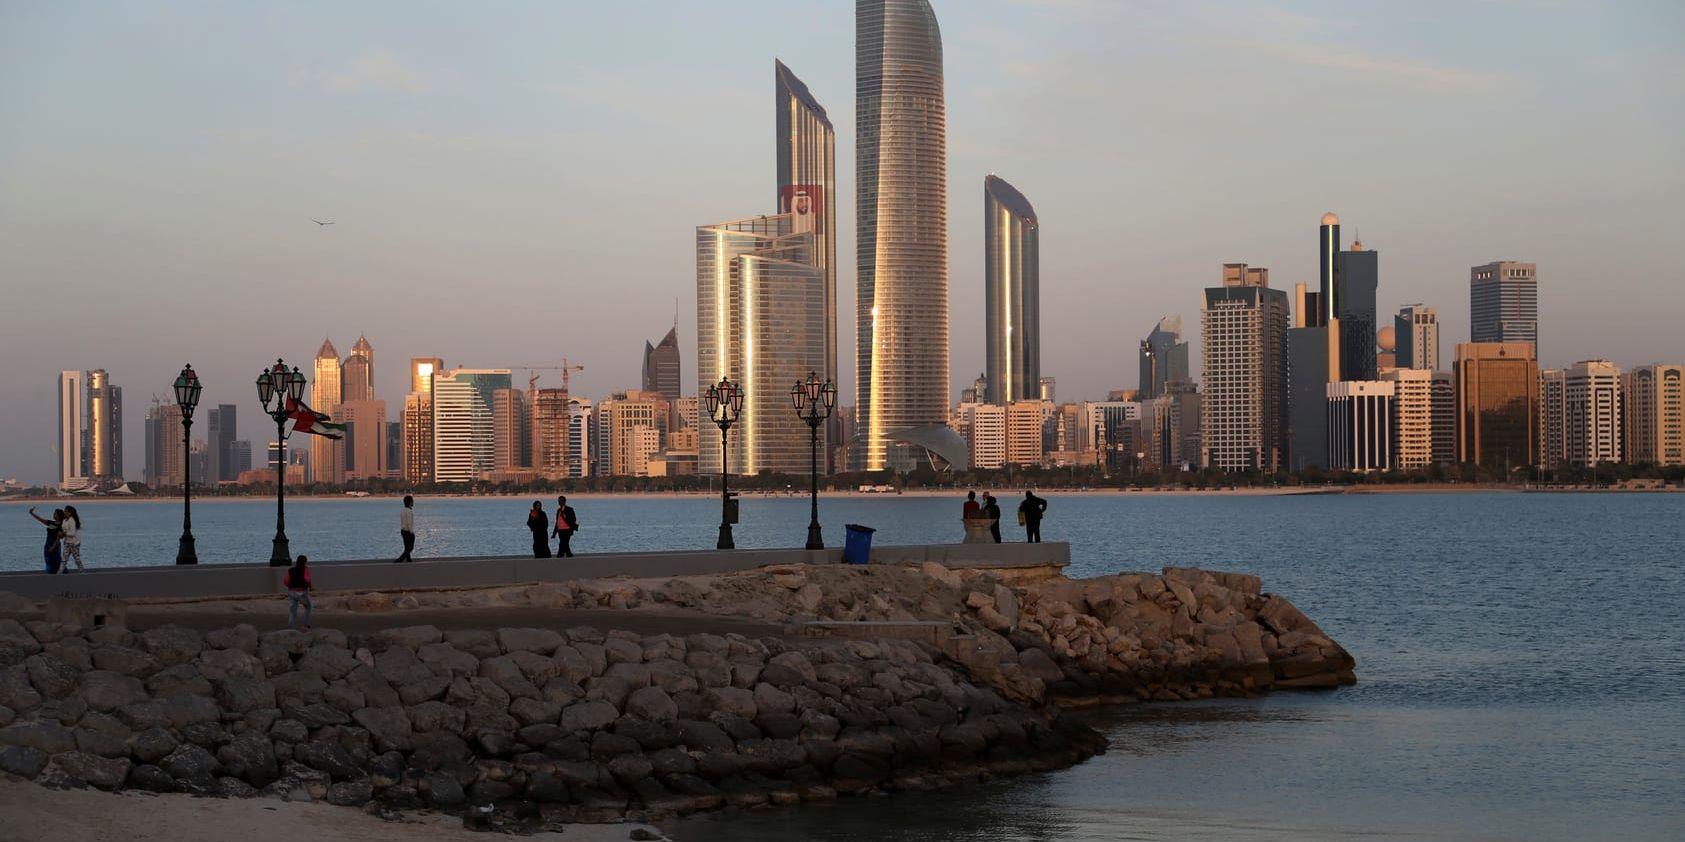 With the city skyline in backdrop, people of different nationalities enjoy a good weather of 24 degrees Celsius (75.2 degrees Fahrenheit) a day before the HSBC Golf Championship in Abu Dhabi, United Arab Emirates, Wednesday, Jan. 14, 2015.